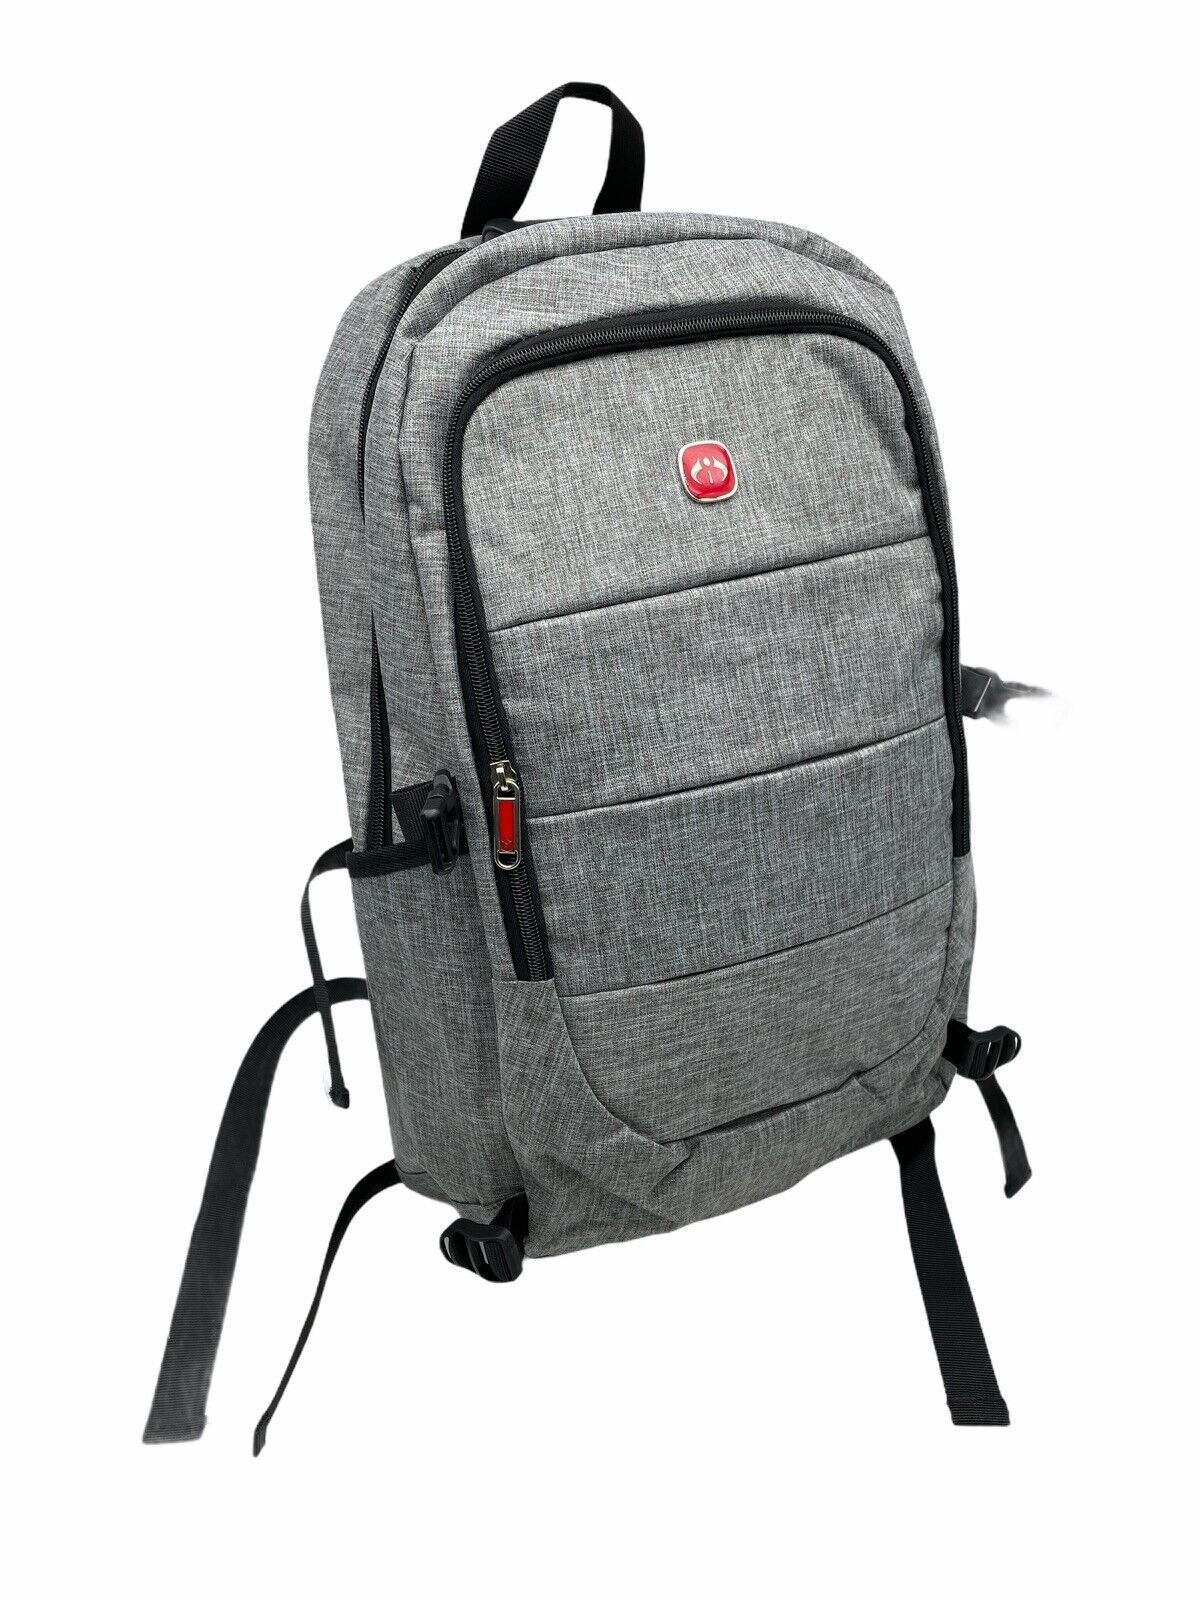 Primary image for Cyber Bags Laptop up to 15.6 in Backpack USB Pocket Travel Computer Bag Gray